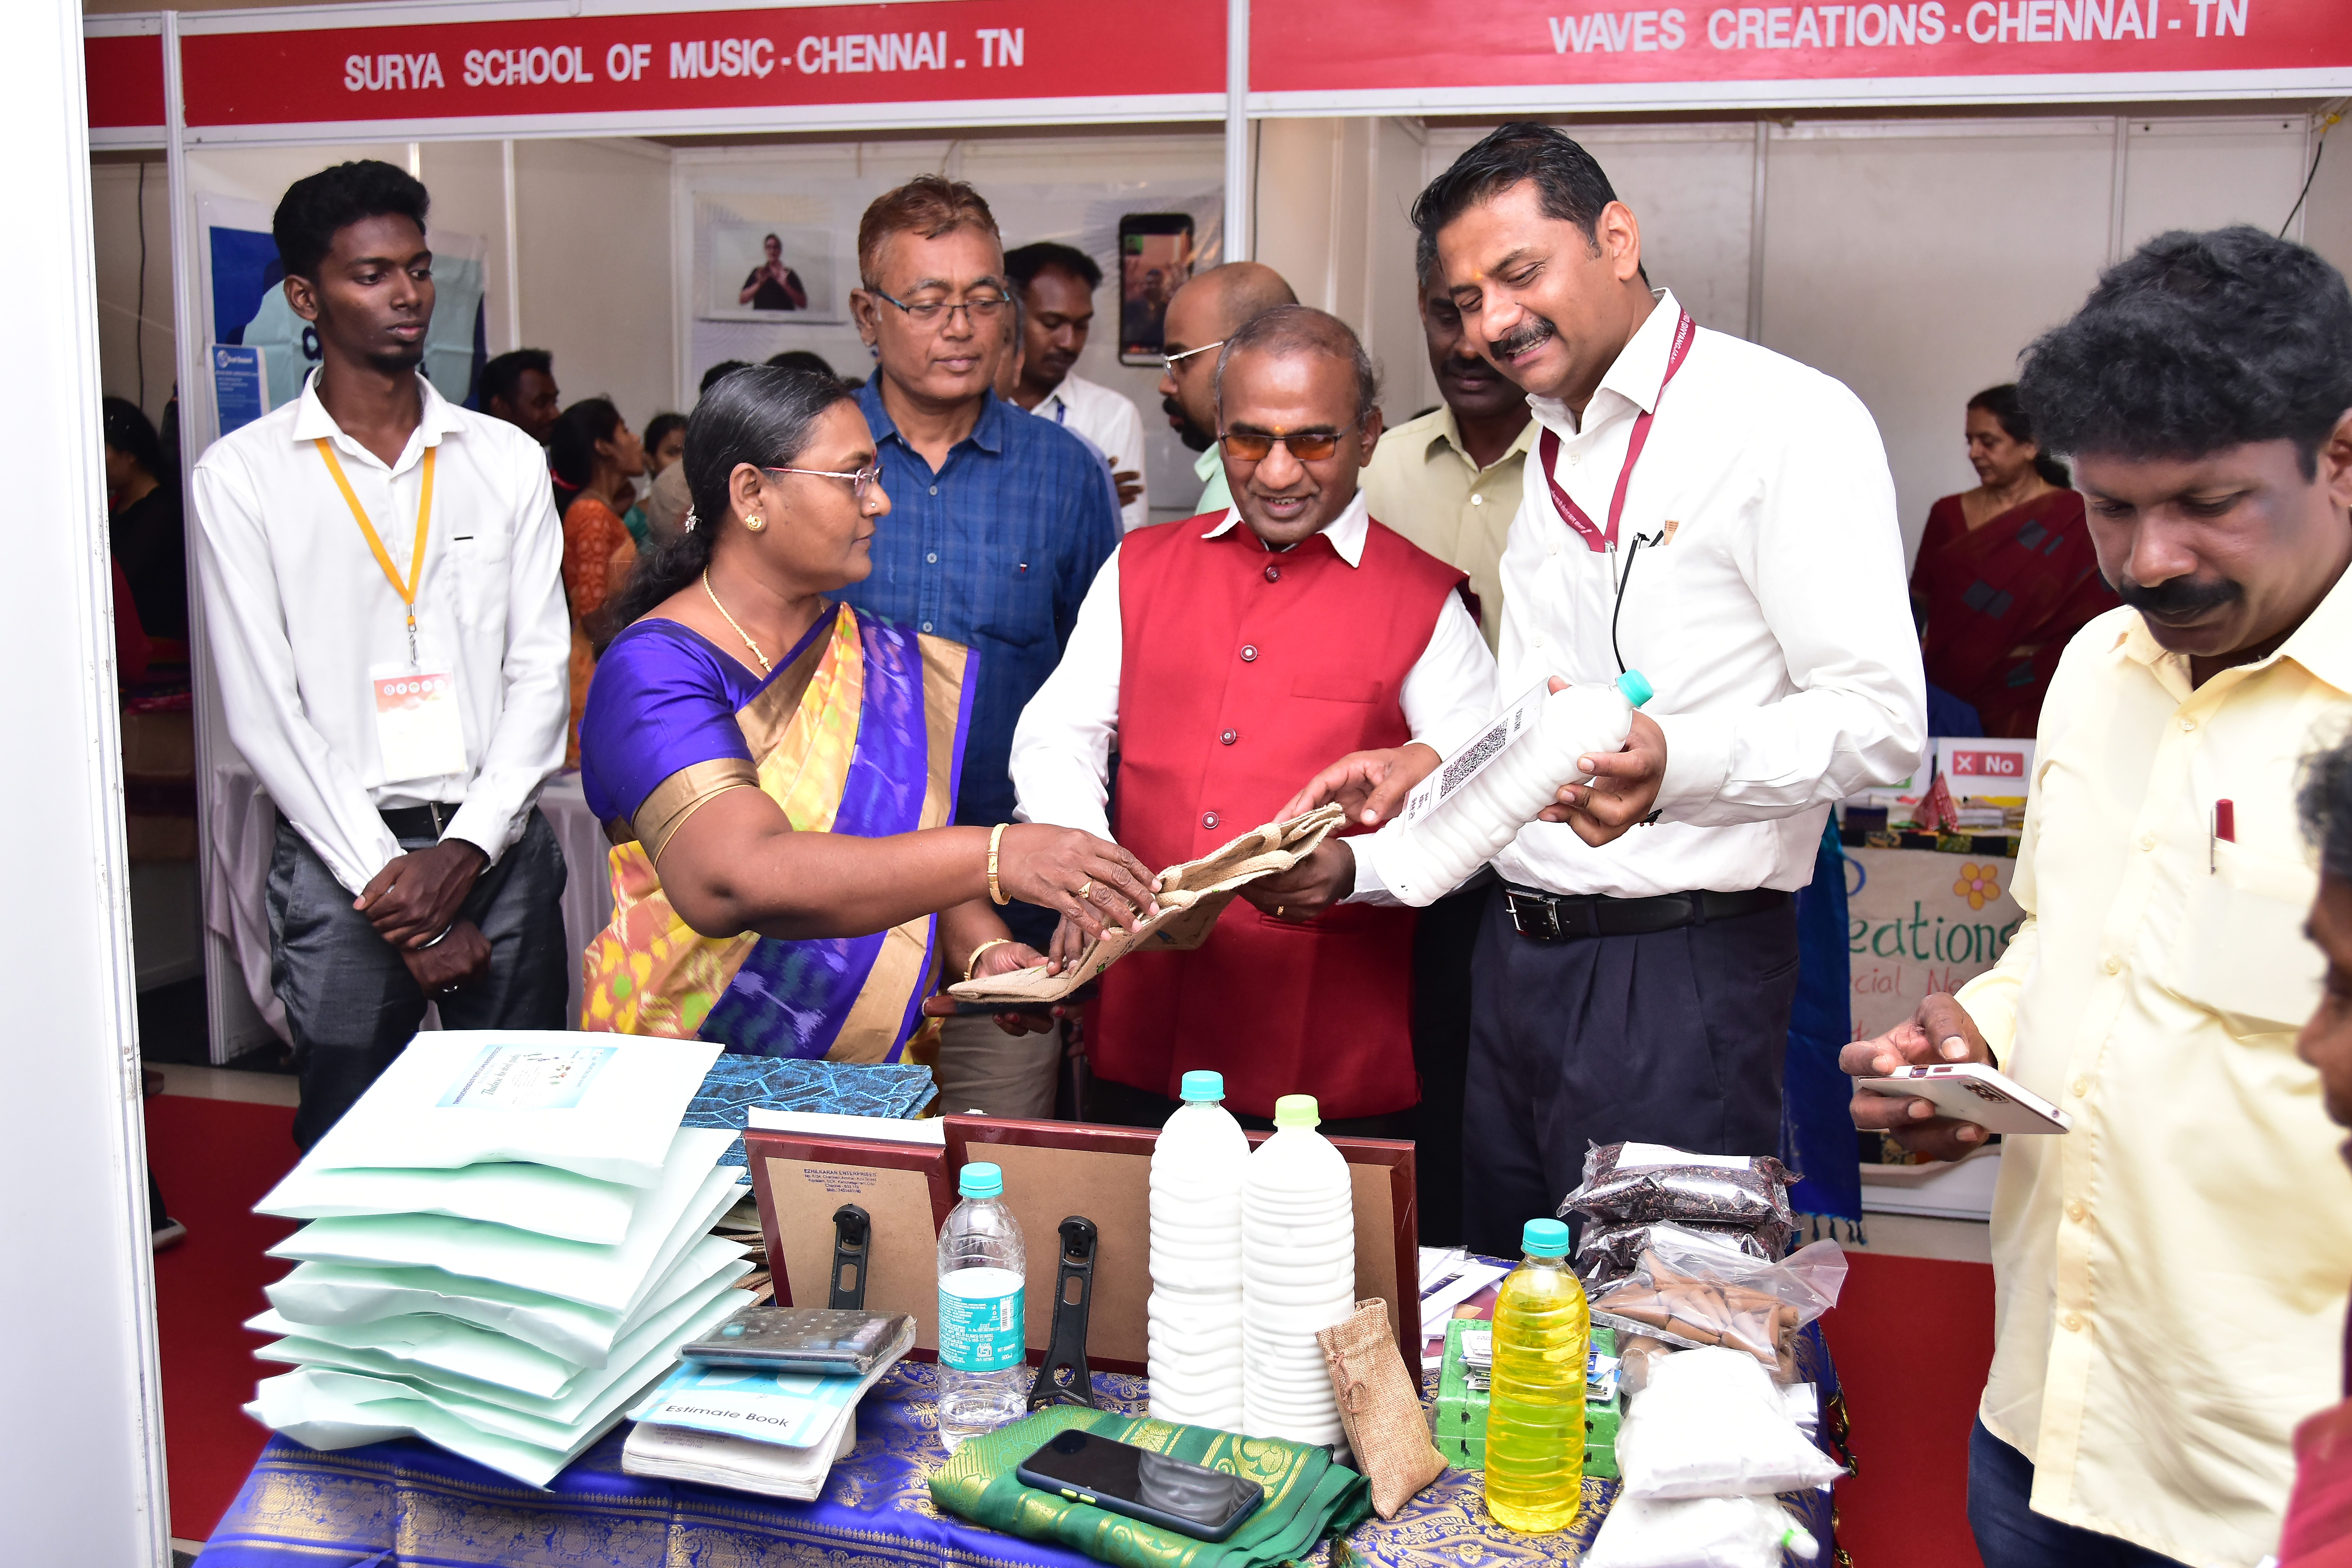 Shri.Nachiketa Rout, Director, NIEPMD along with other dignitaries visting the stall